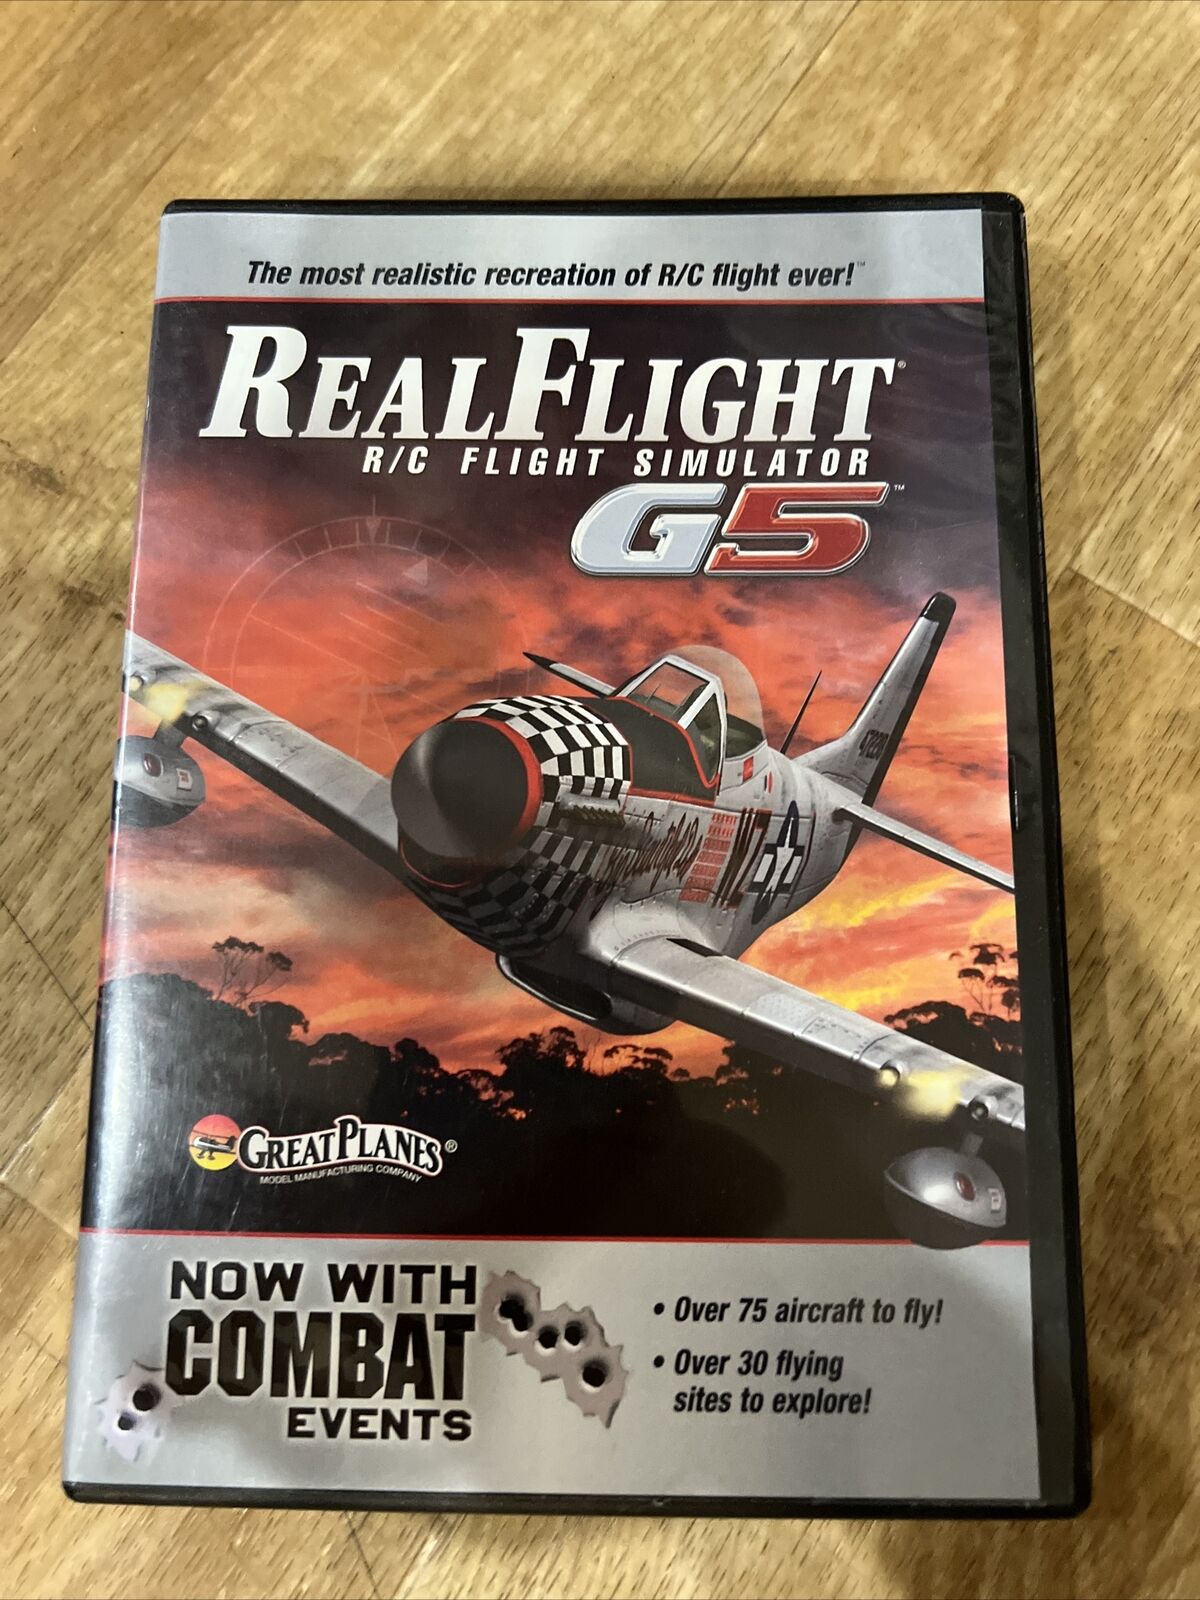 Great Planes RealFlight RC Simulator G5 CD (Combat Events, 75 Aircraft to Fly)